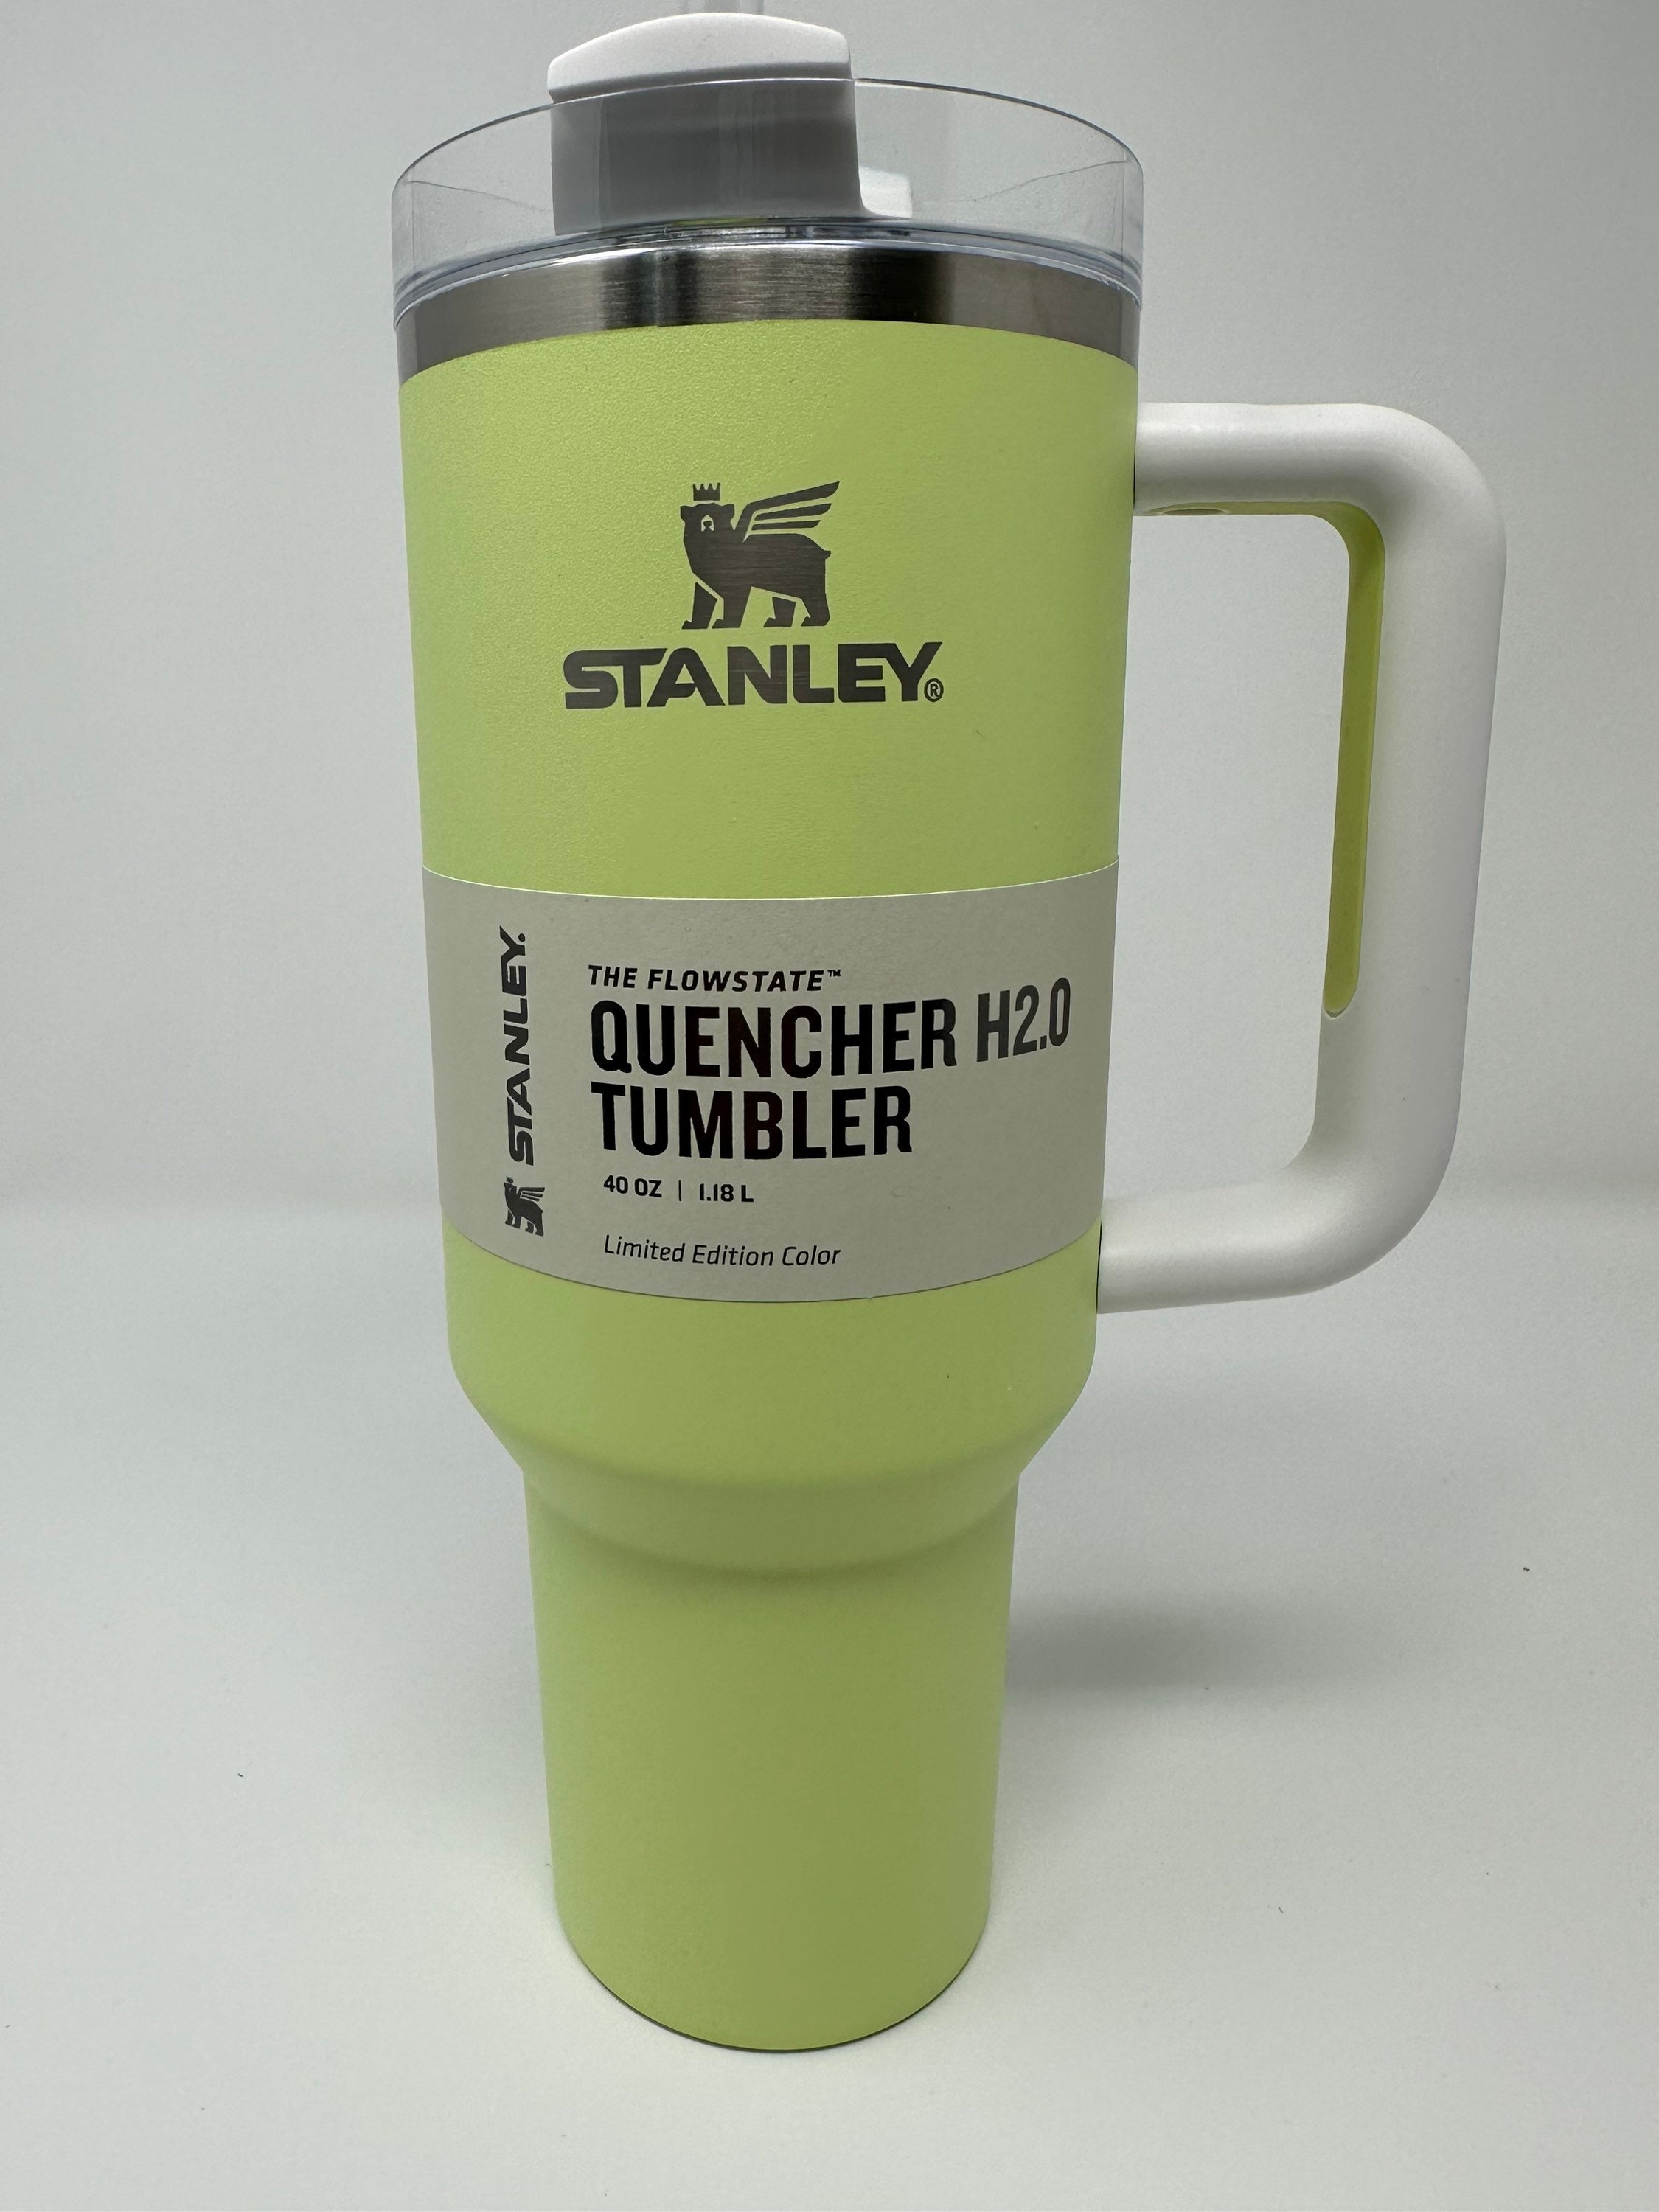 Tie Die Lime Green STANLEY Flowstate Quencher H2.0 Tumbler Cup 40 Ounces  Limited Edition Target Exclusive Personalize It 